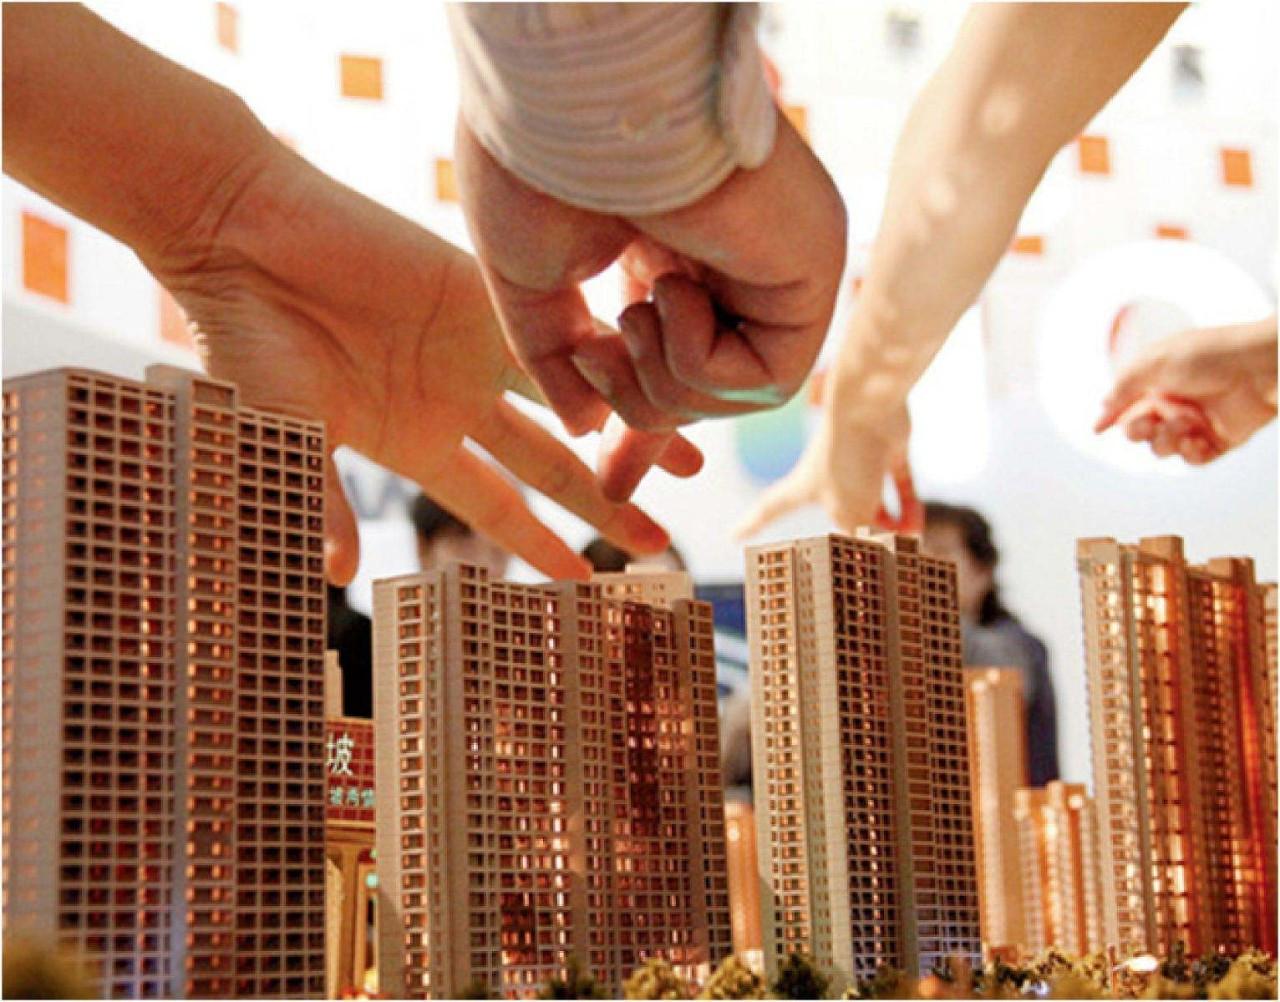 Last week, the real estate market saw a drop in transactions: first-tier Shanghai dropped by 25.5%, second- and third-tier cities over 80% declined